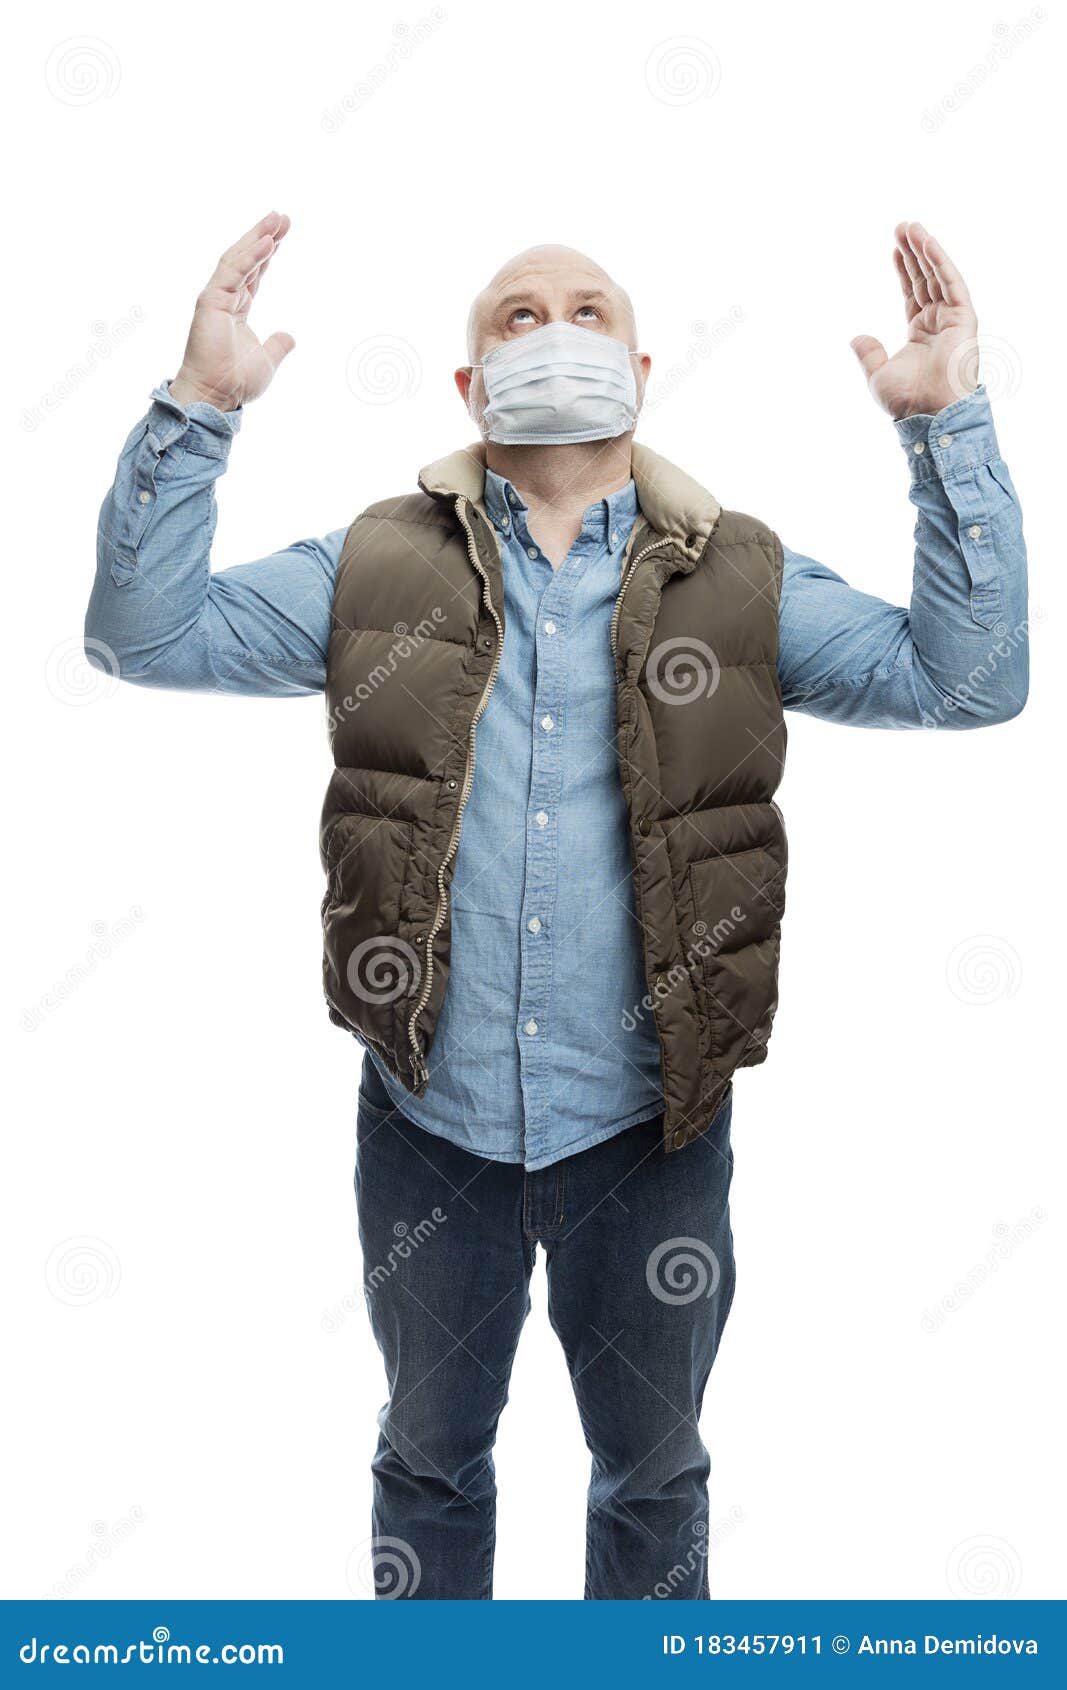 Adult Bald Man in a Medical Mask Raised His Hands Up in Prayer. the ...